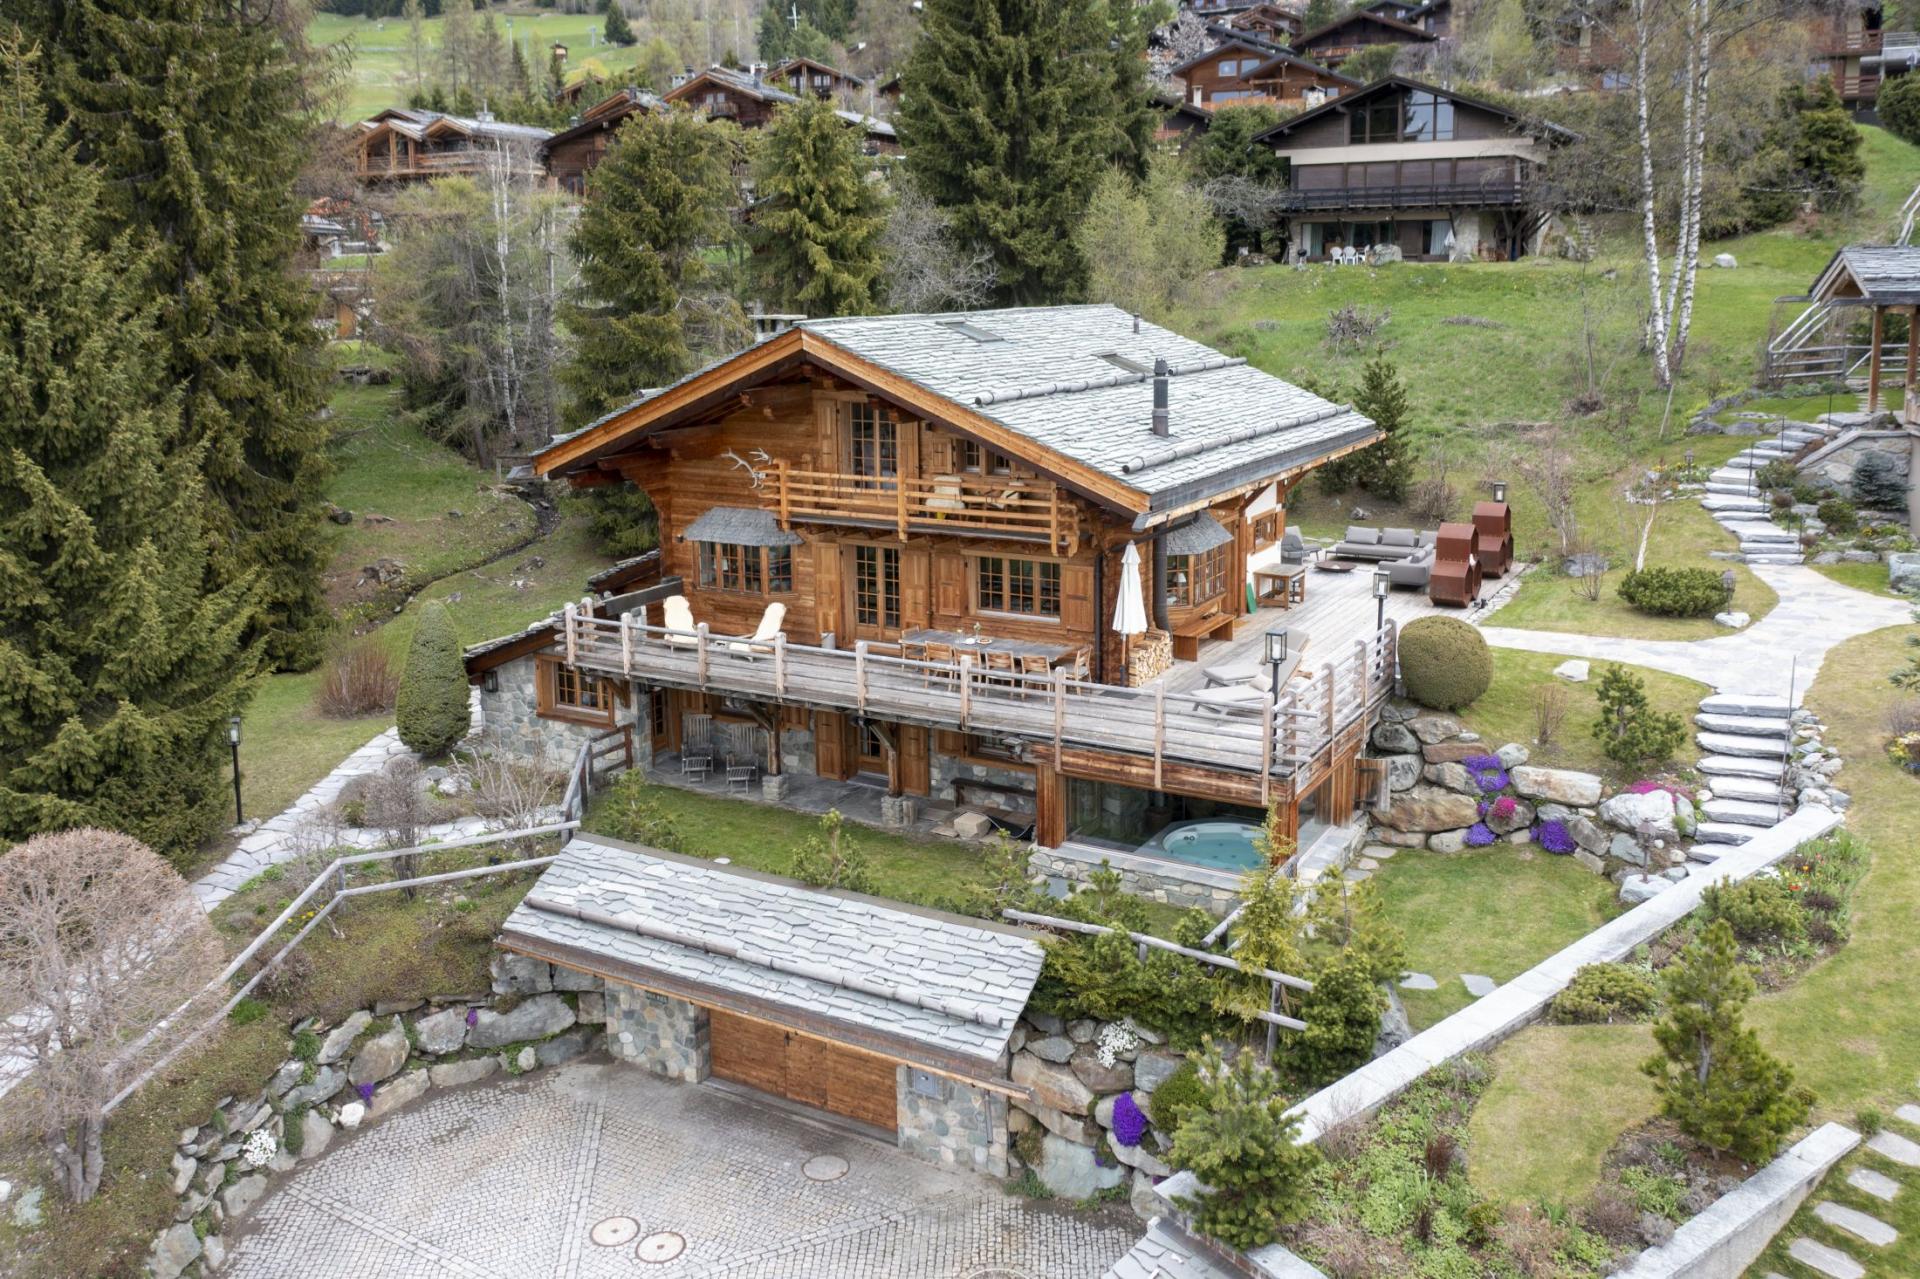 What Is a Chalet? The Former Alpine Cottage Turned Trendy Home